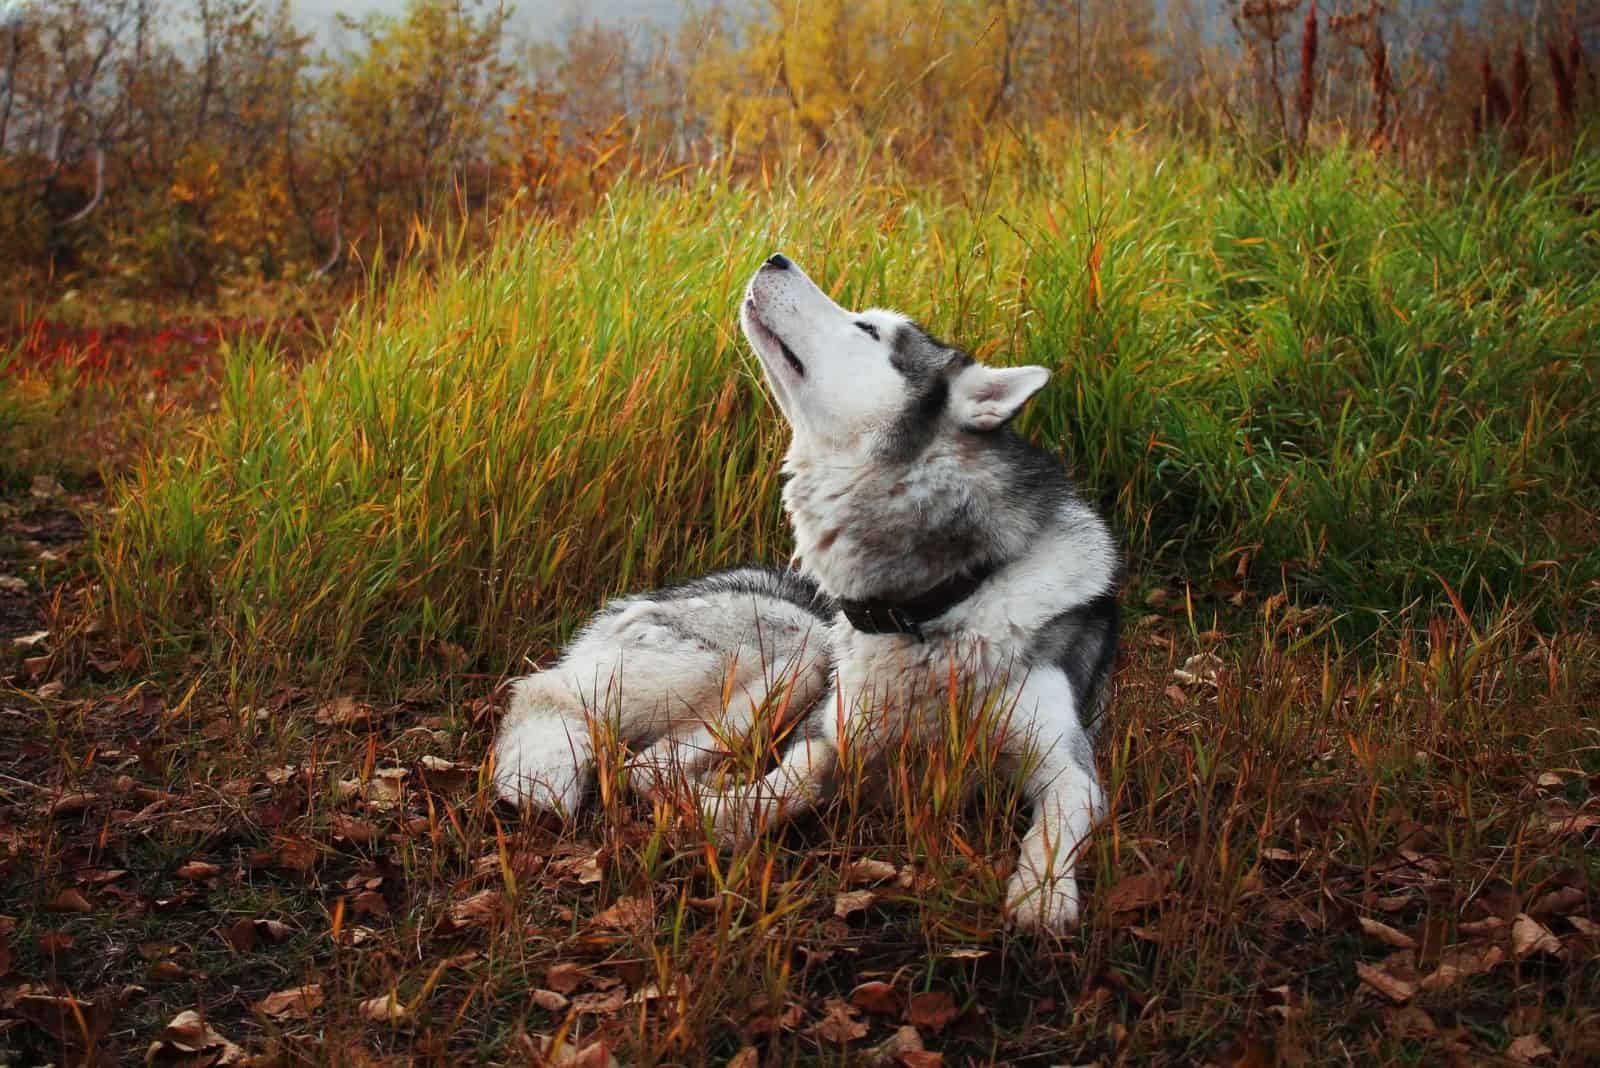 A husky dog throwing its muzzle up sniffs the autumn air among the contrasting multi-colored herbs